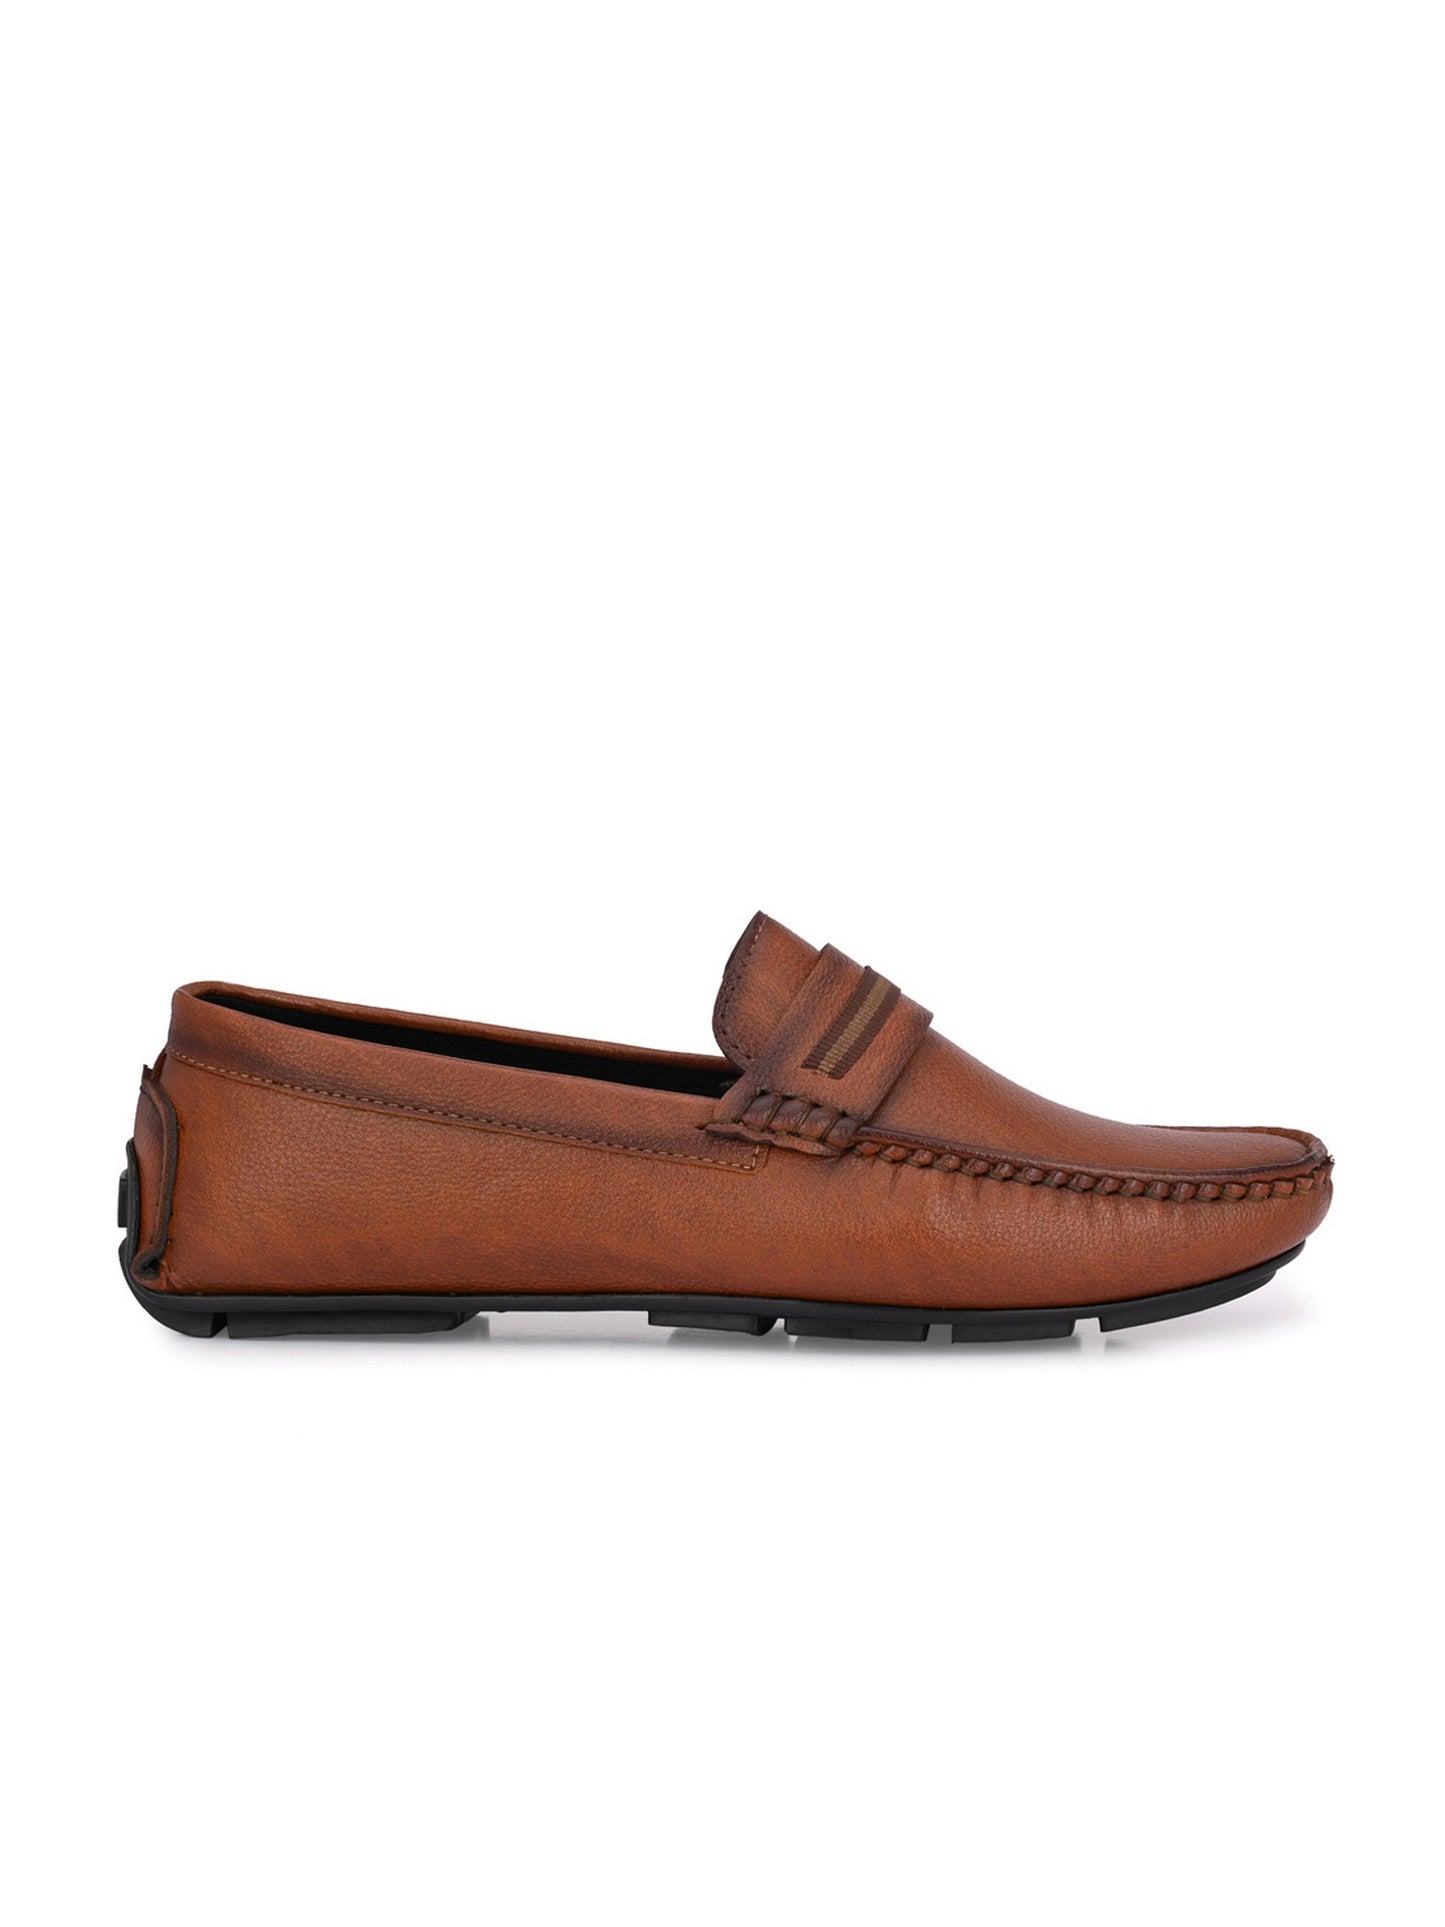 Guava Men's Tan Casual Slip On Driving Loafers (GV15JA784)